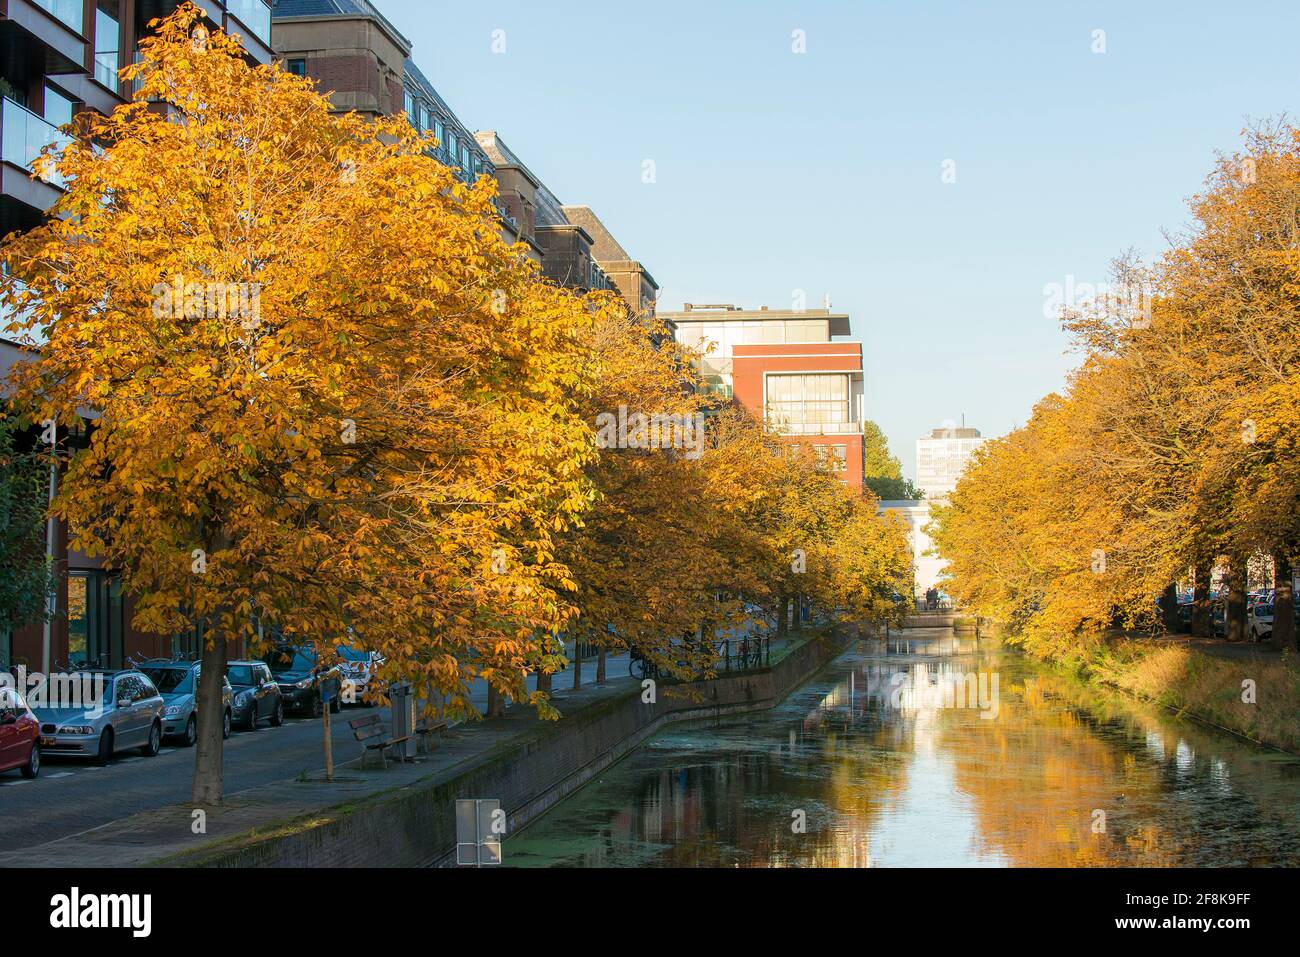 View on a town canal with horse chestnut (Aesculus hippocastanum) trees on the quayside in The Hague, The Netherlands Stock Photo